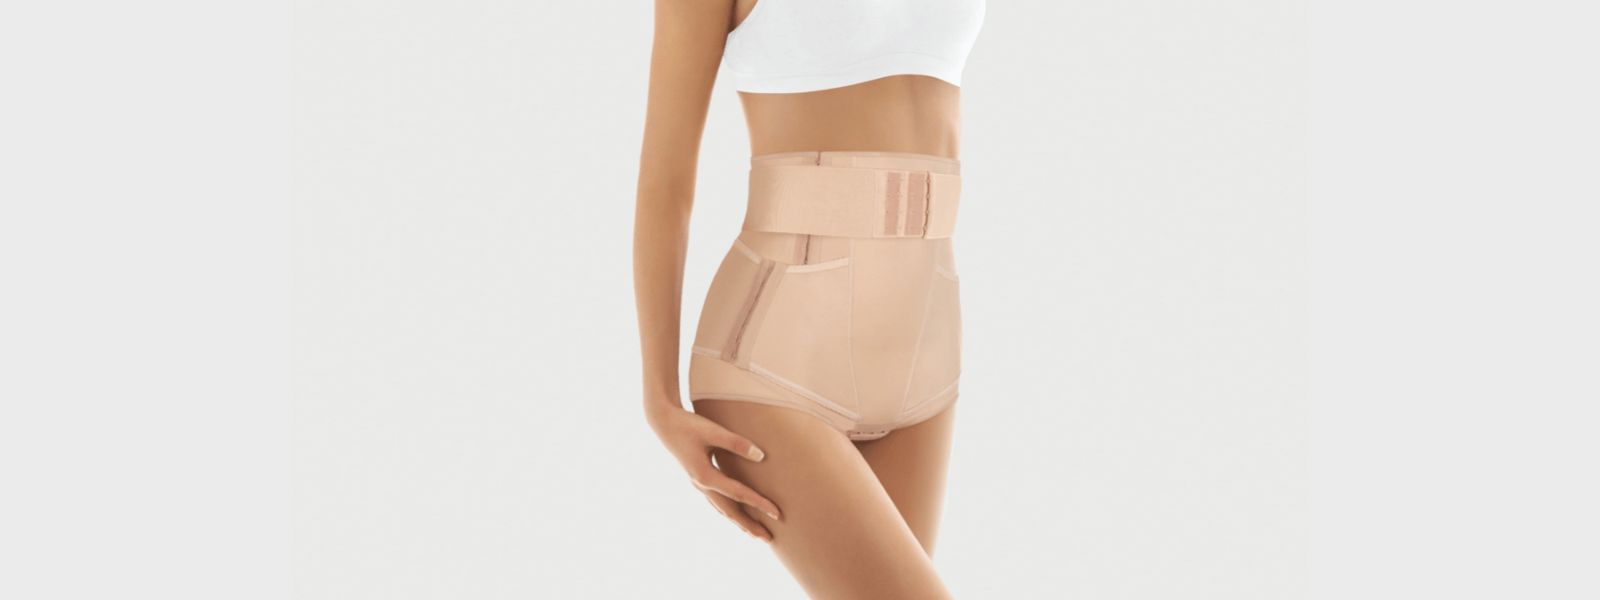 The compression garment is removed two days after surgery to take